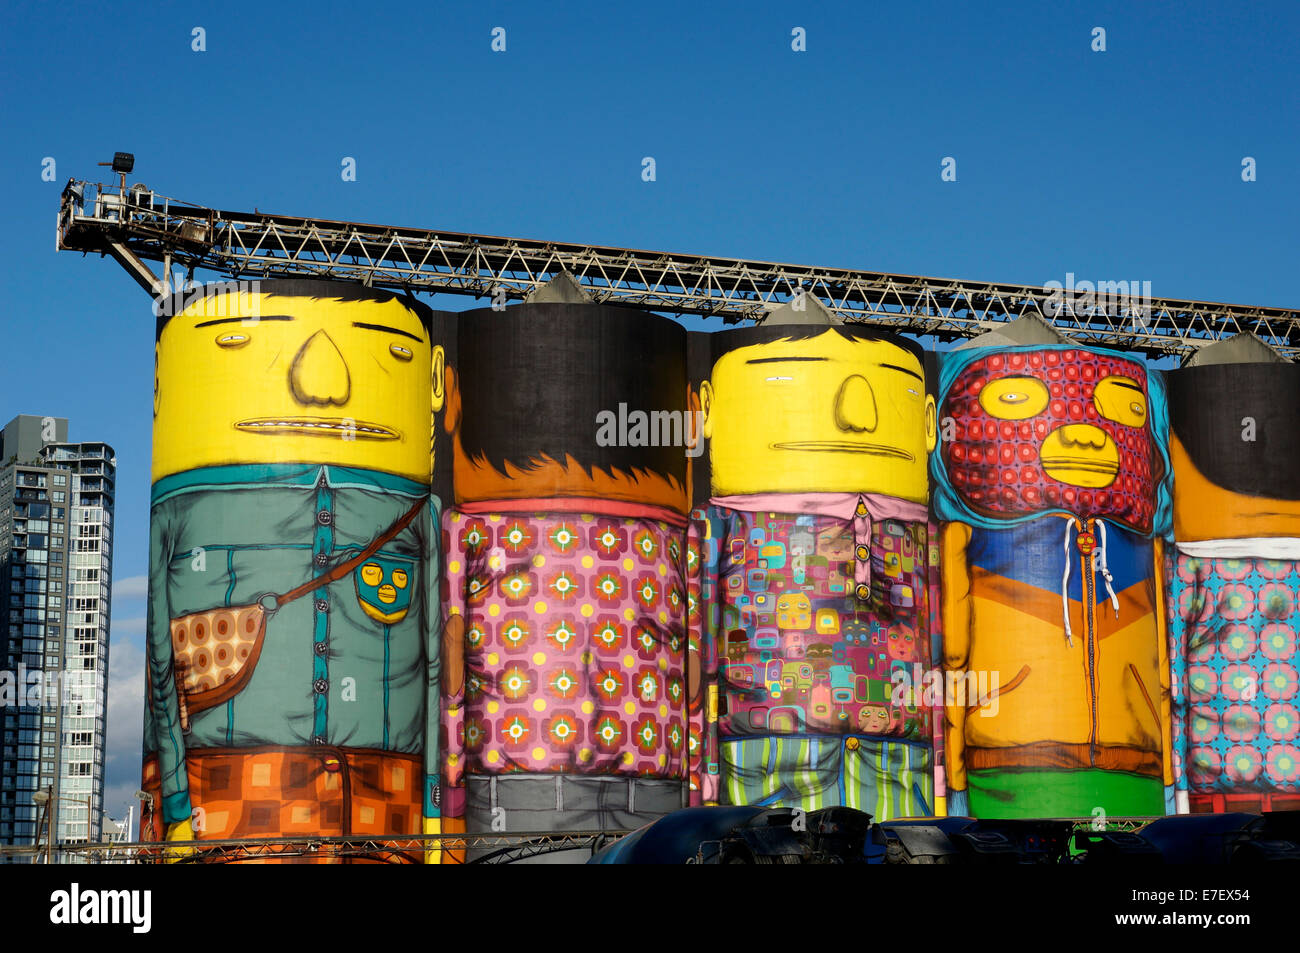 Giants mural painted by OSGEMEOS on silos at Ocean Concrete on Granville Island, Vancouver, British Columbia, Canada Stock Photo